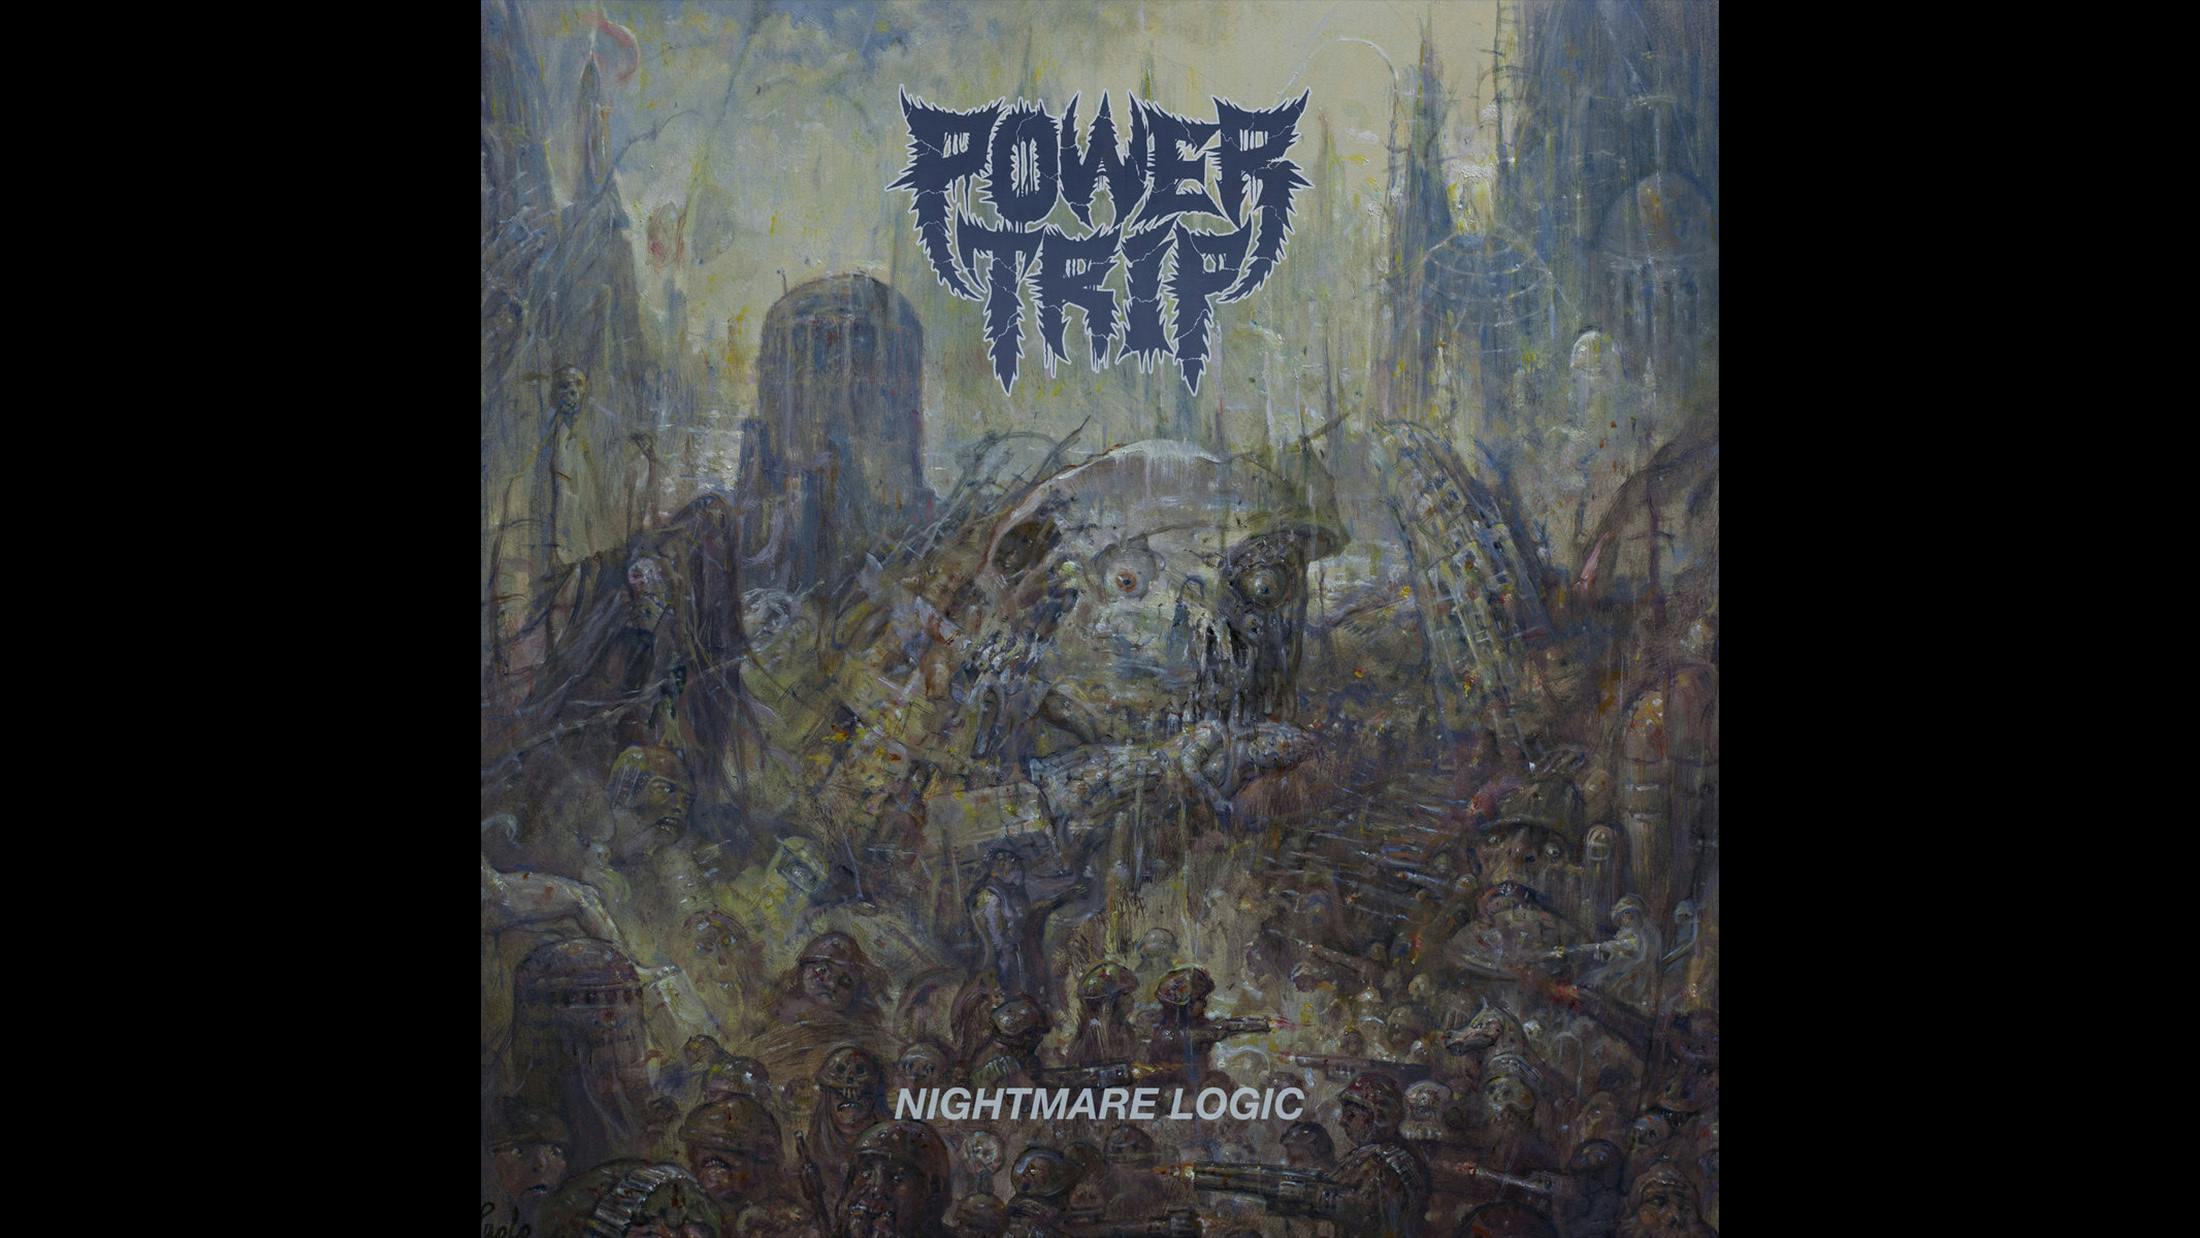 "Imagine if Cro Mags, Leeway, Slayer, and classic Sepultura were cooked into a Christmas pie. That’s Power Trip. Power Trip has been growing a reputation for having some of the most exciting live shows around, and I - like the rest of the music world - can’t wait to be a part of it."